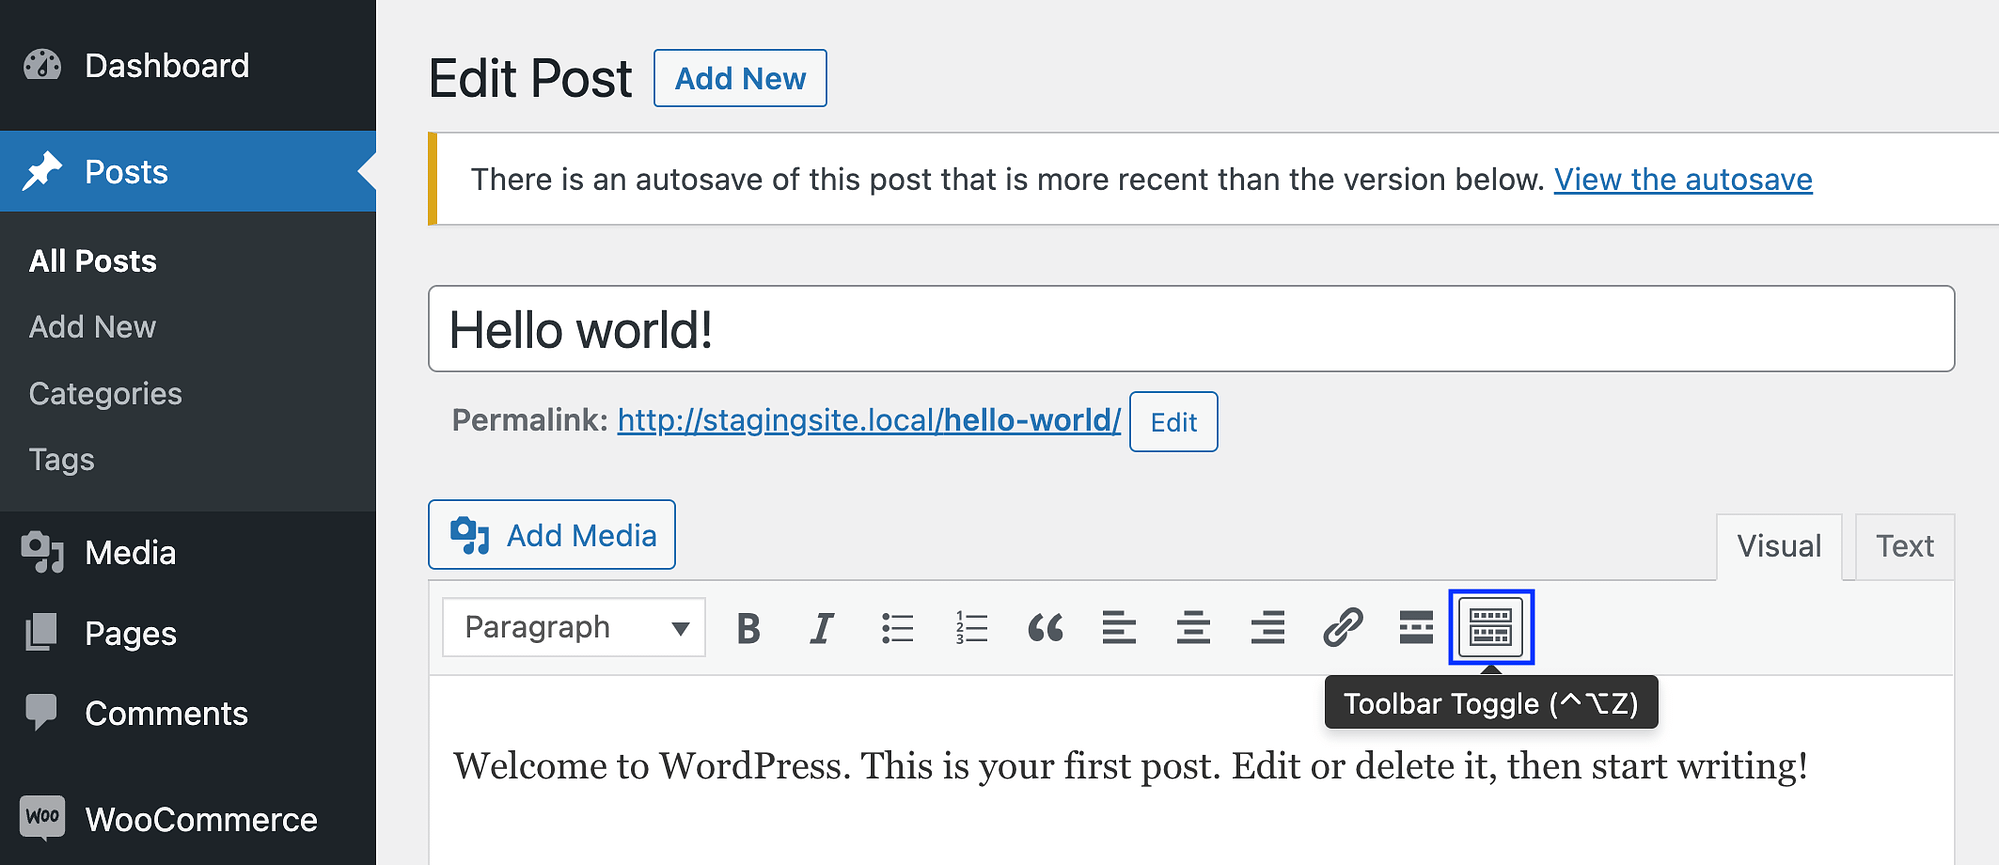 Open Toolbar Toggle in the classic editor.